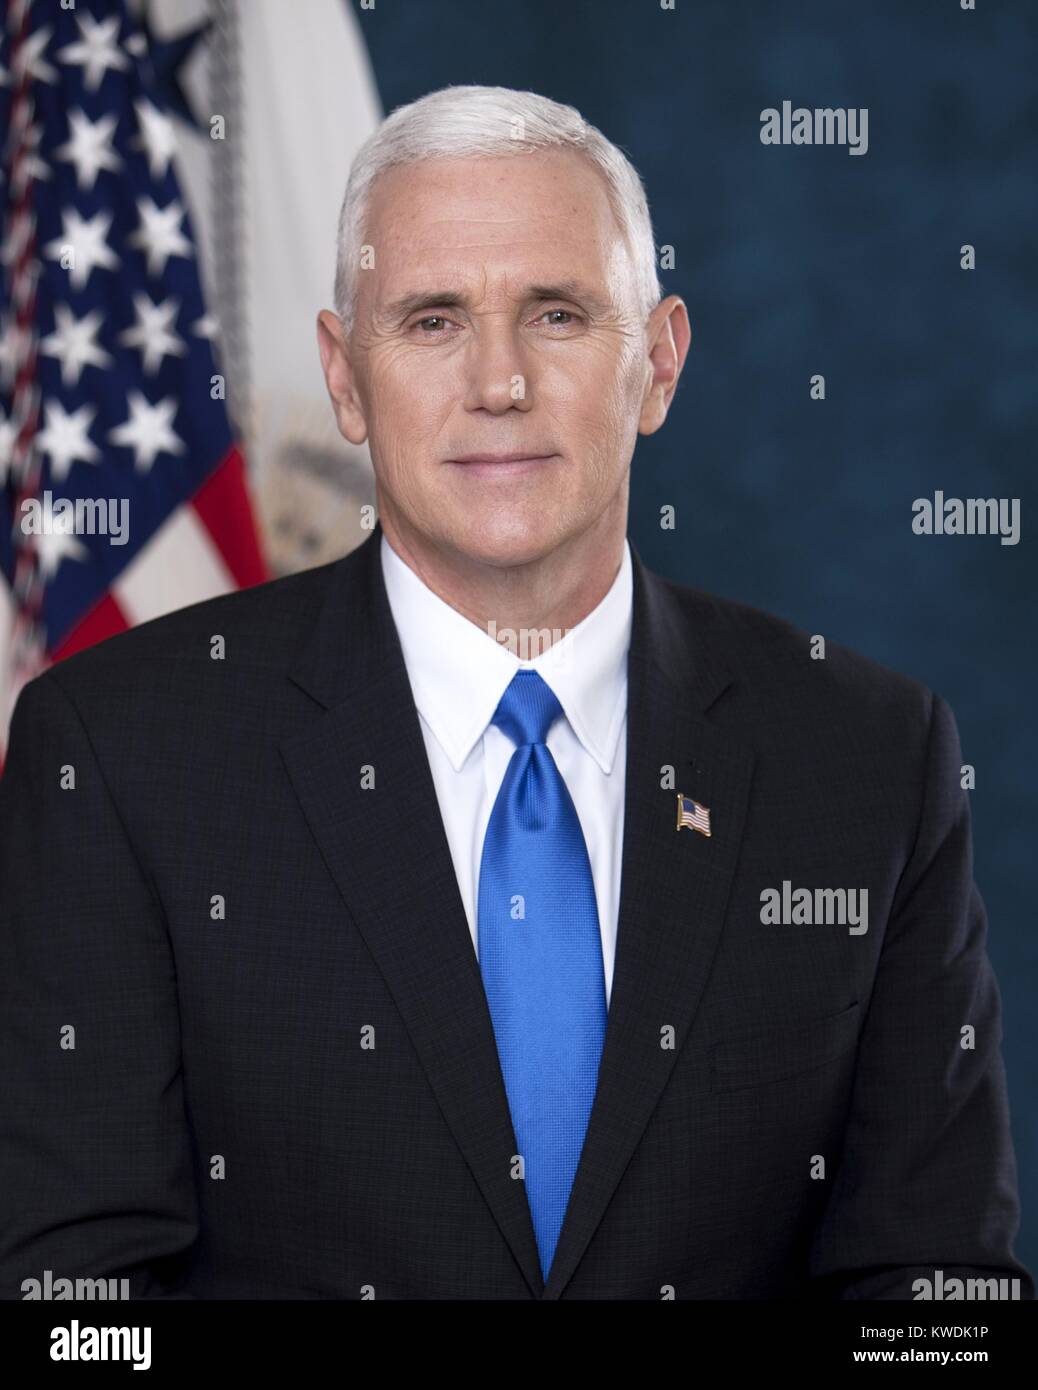 Photo of Vice President-elect Mike Pence taken on 2017-01-28, 2 days before the inauguration. It was posted with his biography on the White House site, until Oct 31, 2017, when it was replaced with his official White House photo (BSLOC 2017 18 155) Stock Photo